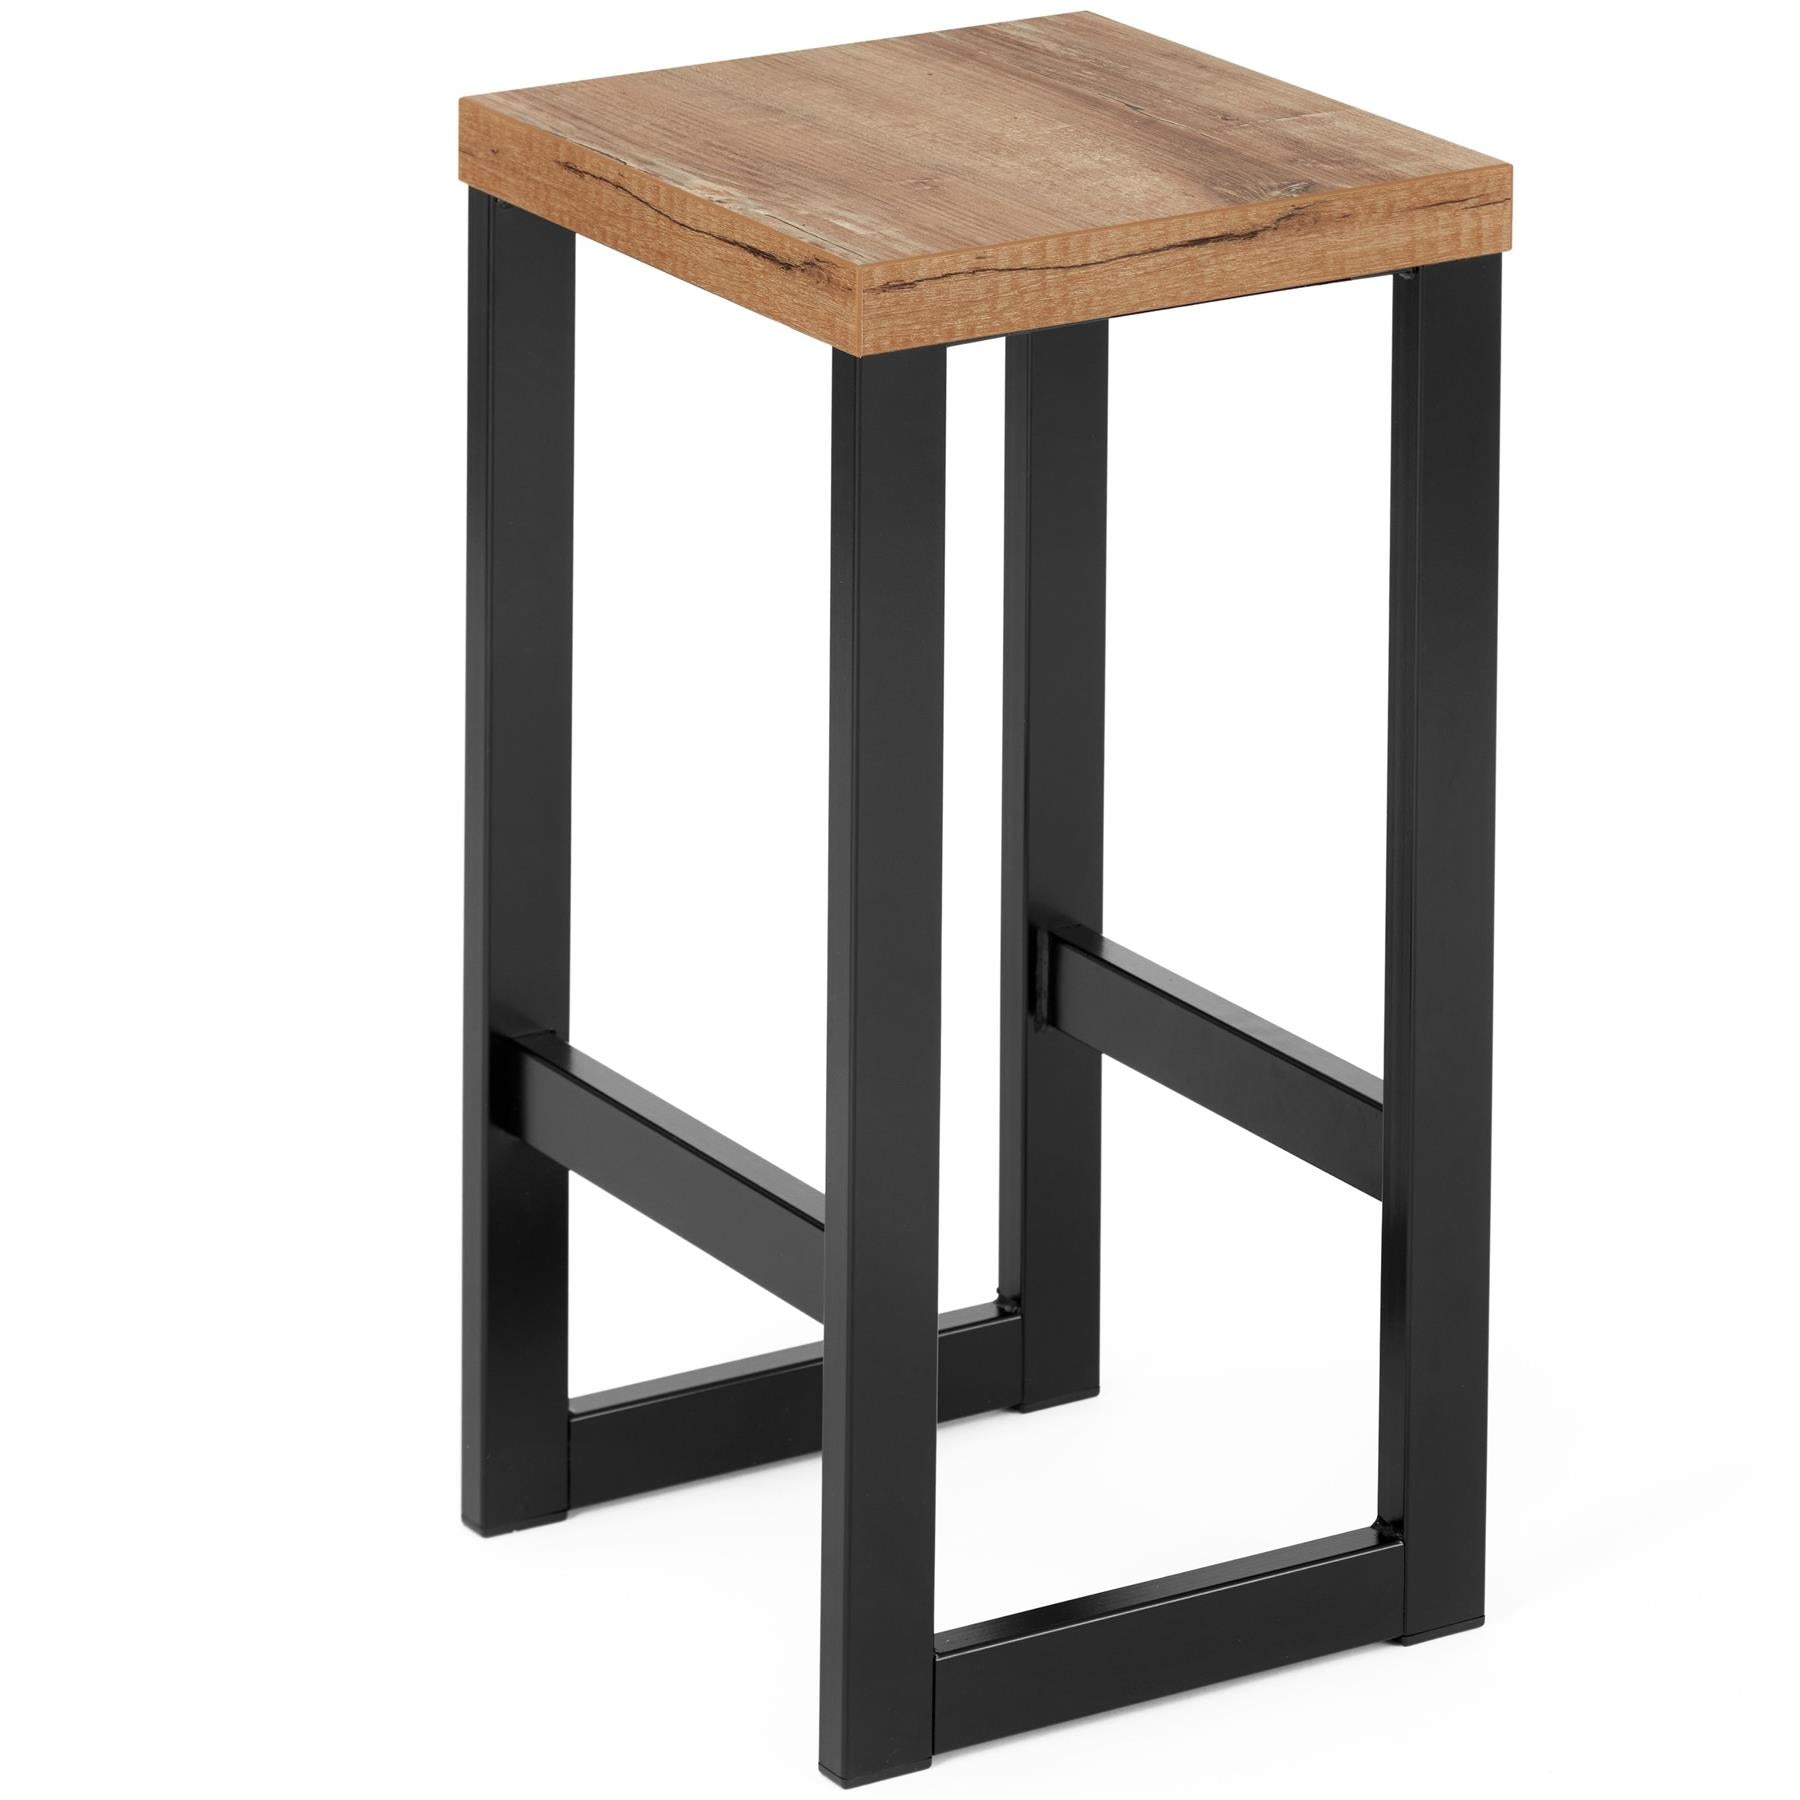 Kitchen Breakfast Bar Stools with Footrest - Wooden Stool for Living Room